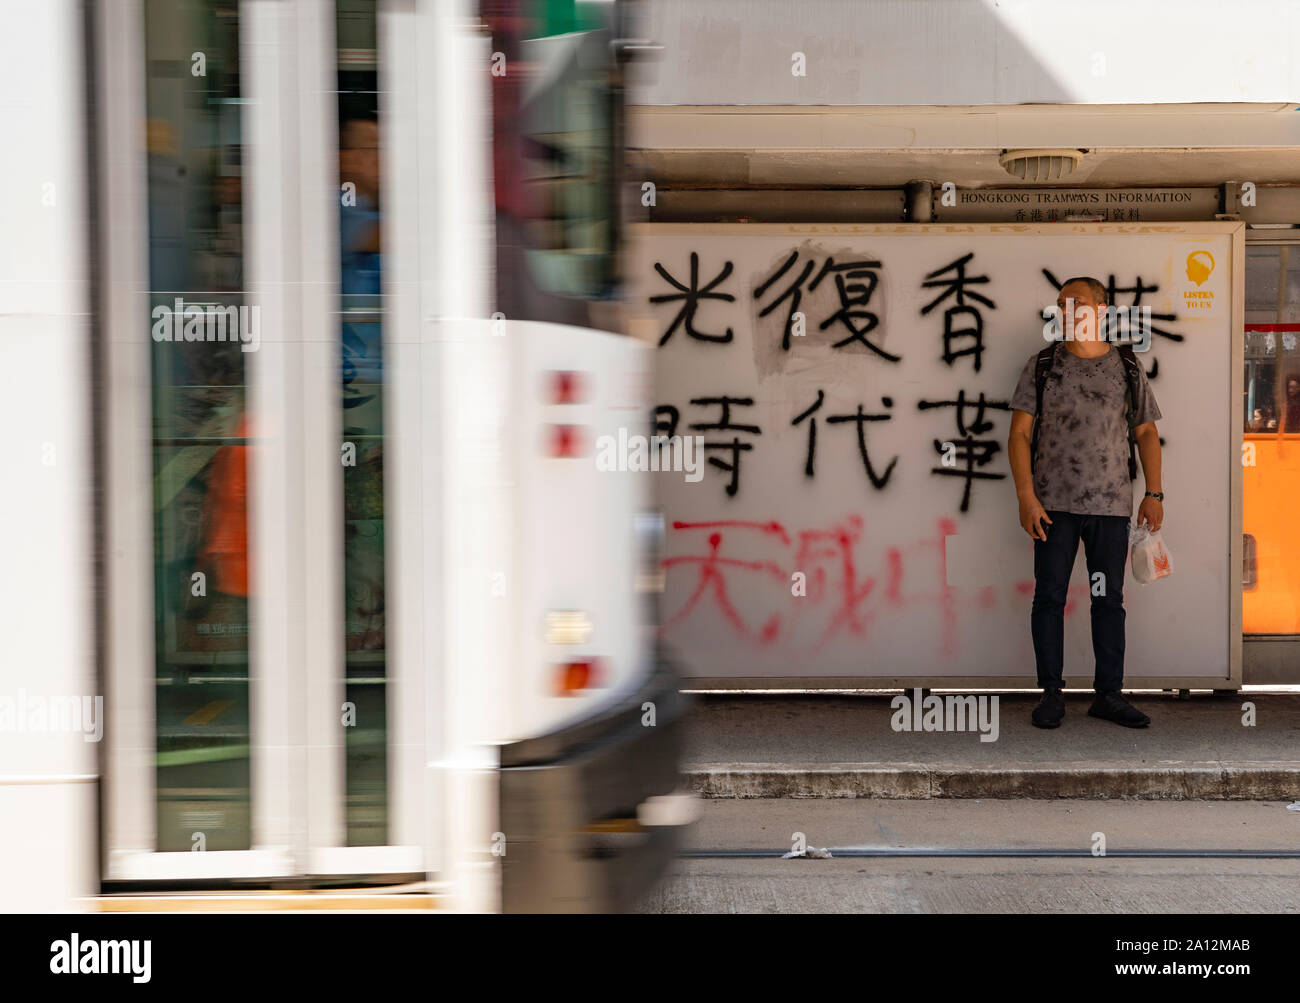 Vandalised tram stop in Hong Kong with slogans of the prodemocracy movement spray painted onto screen. Stock Photo